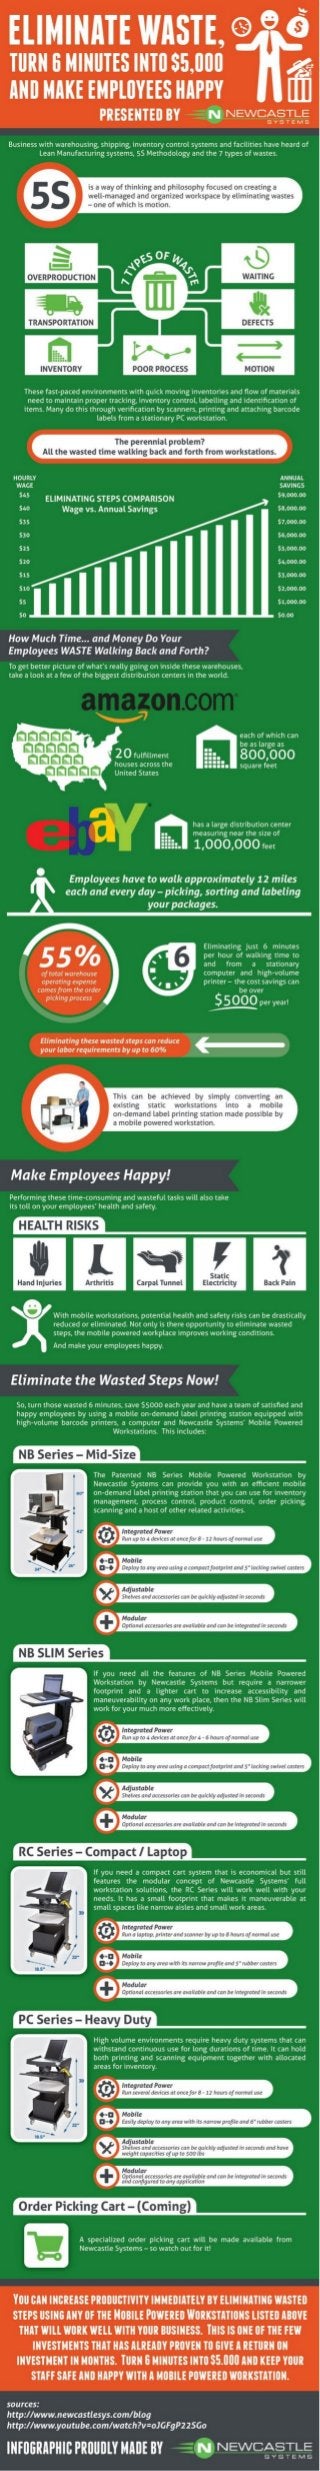 Eliminate Waste, Turn 6 Minutes into $5000 and Make Employees Happy